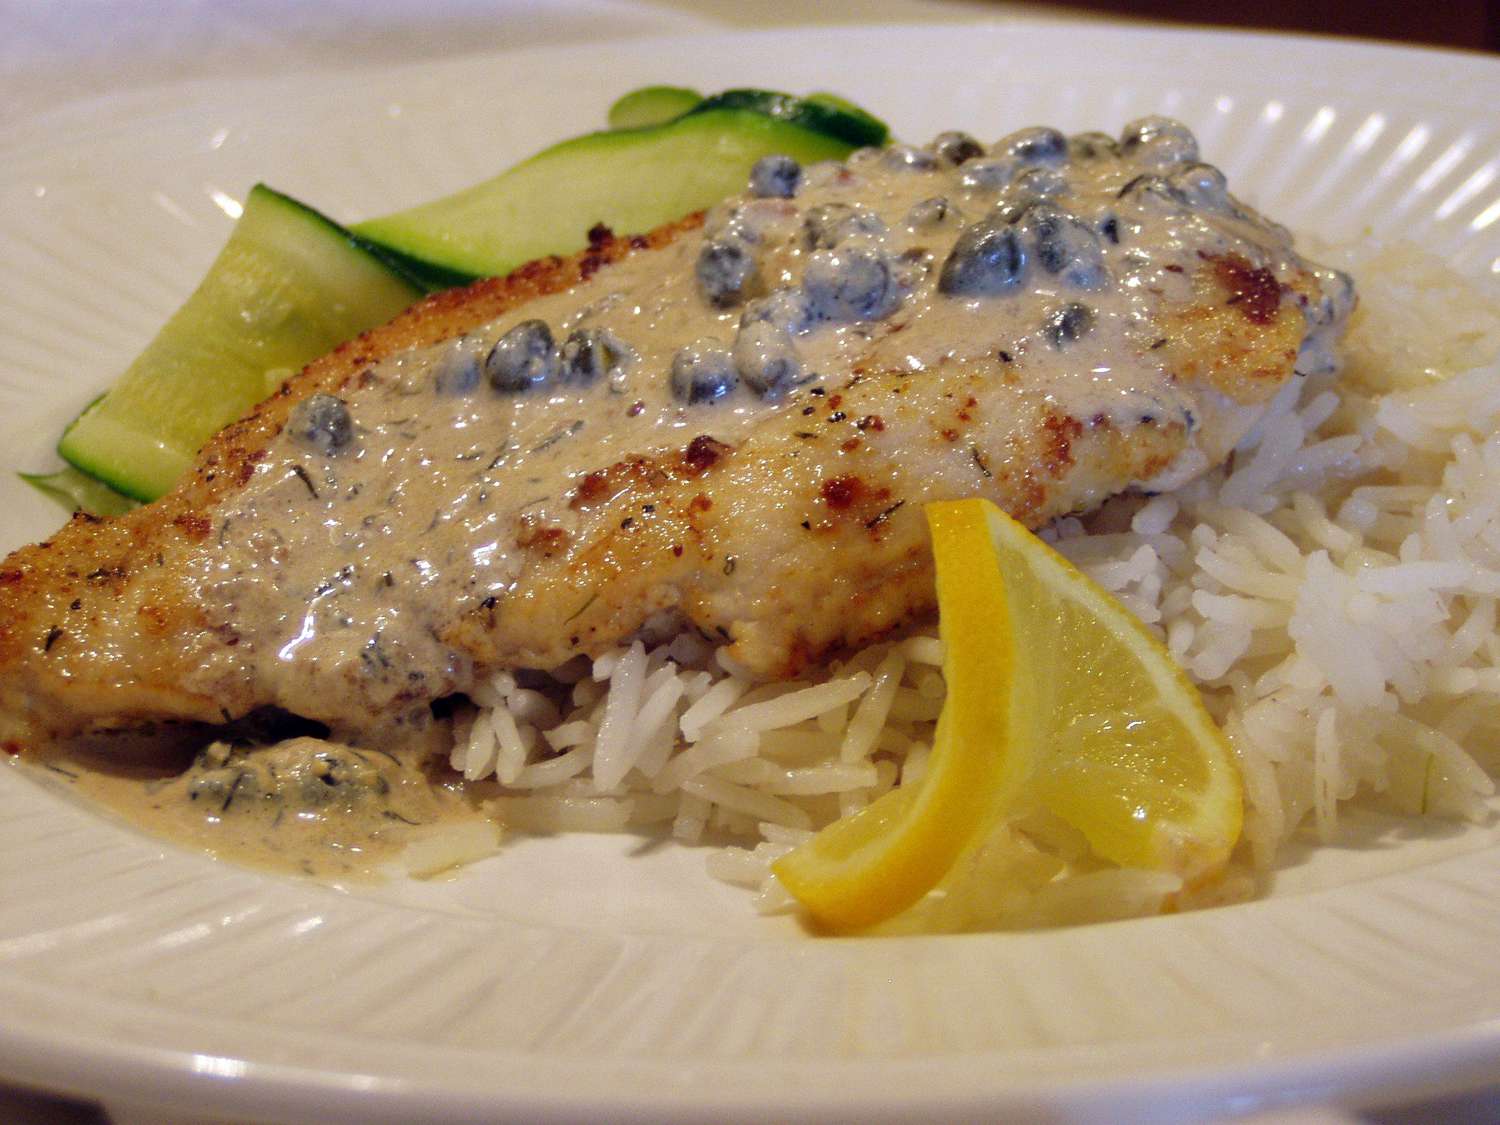 a chicken breast on a bed of white rice topped with cream sauce and garnished with a twisted lemon slice, with cooked zucchini slices in the background